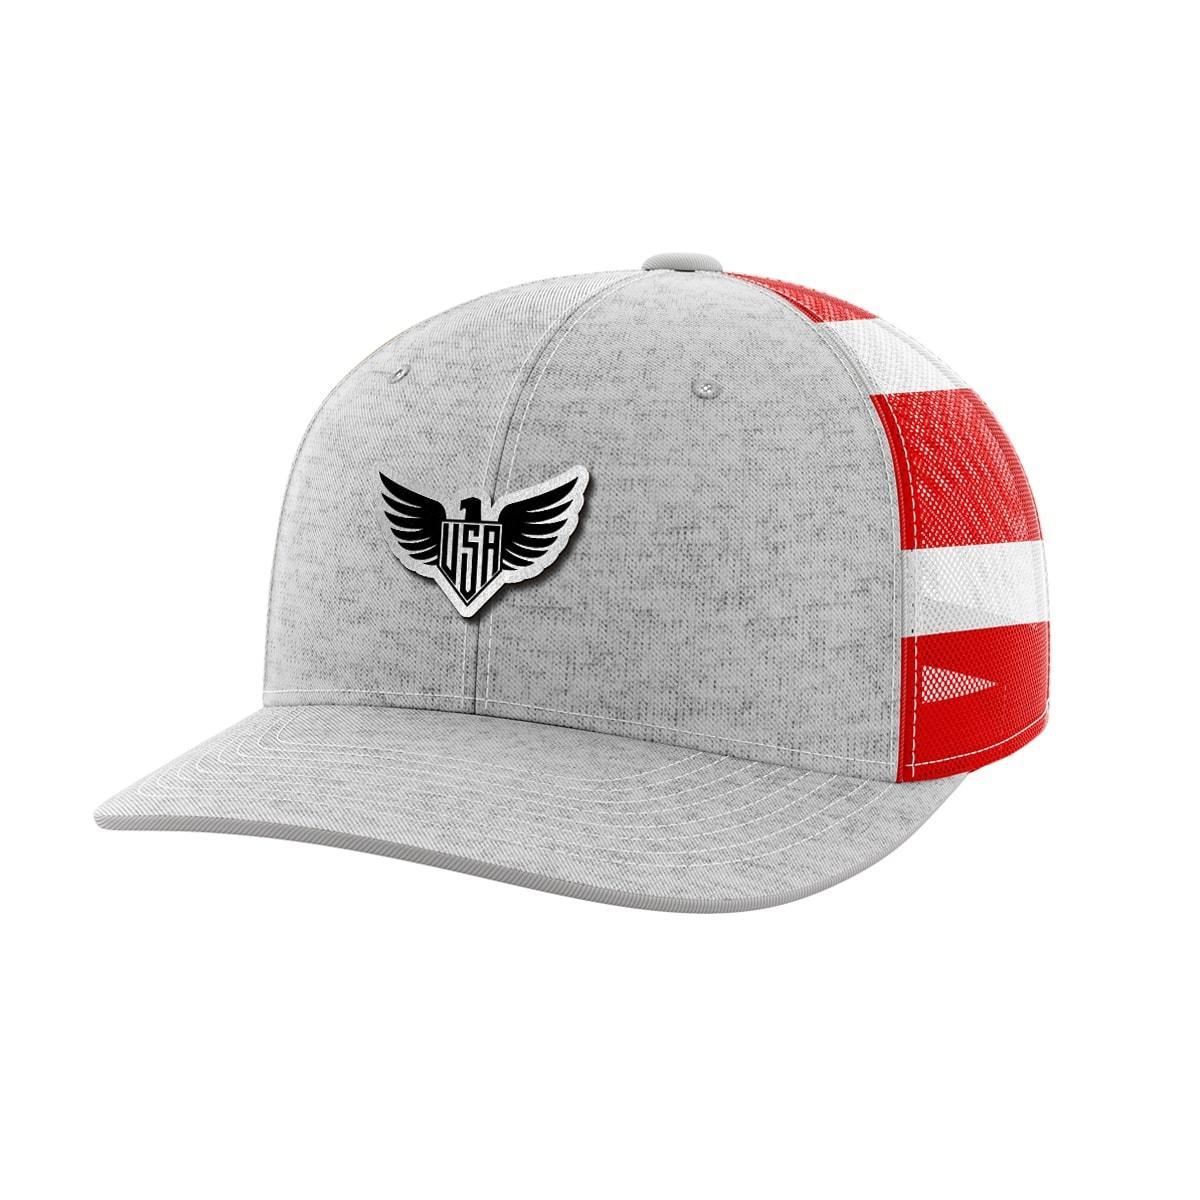 Eagle USA Black Patch Hat - Greater Half